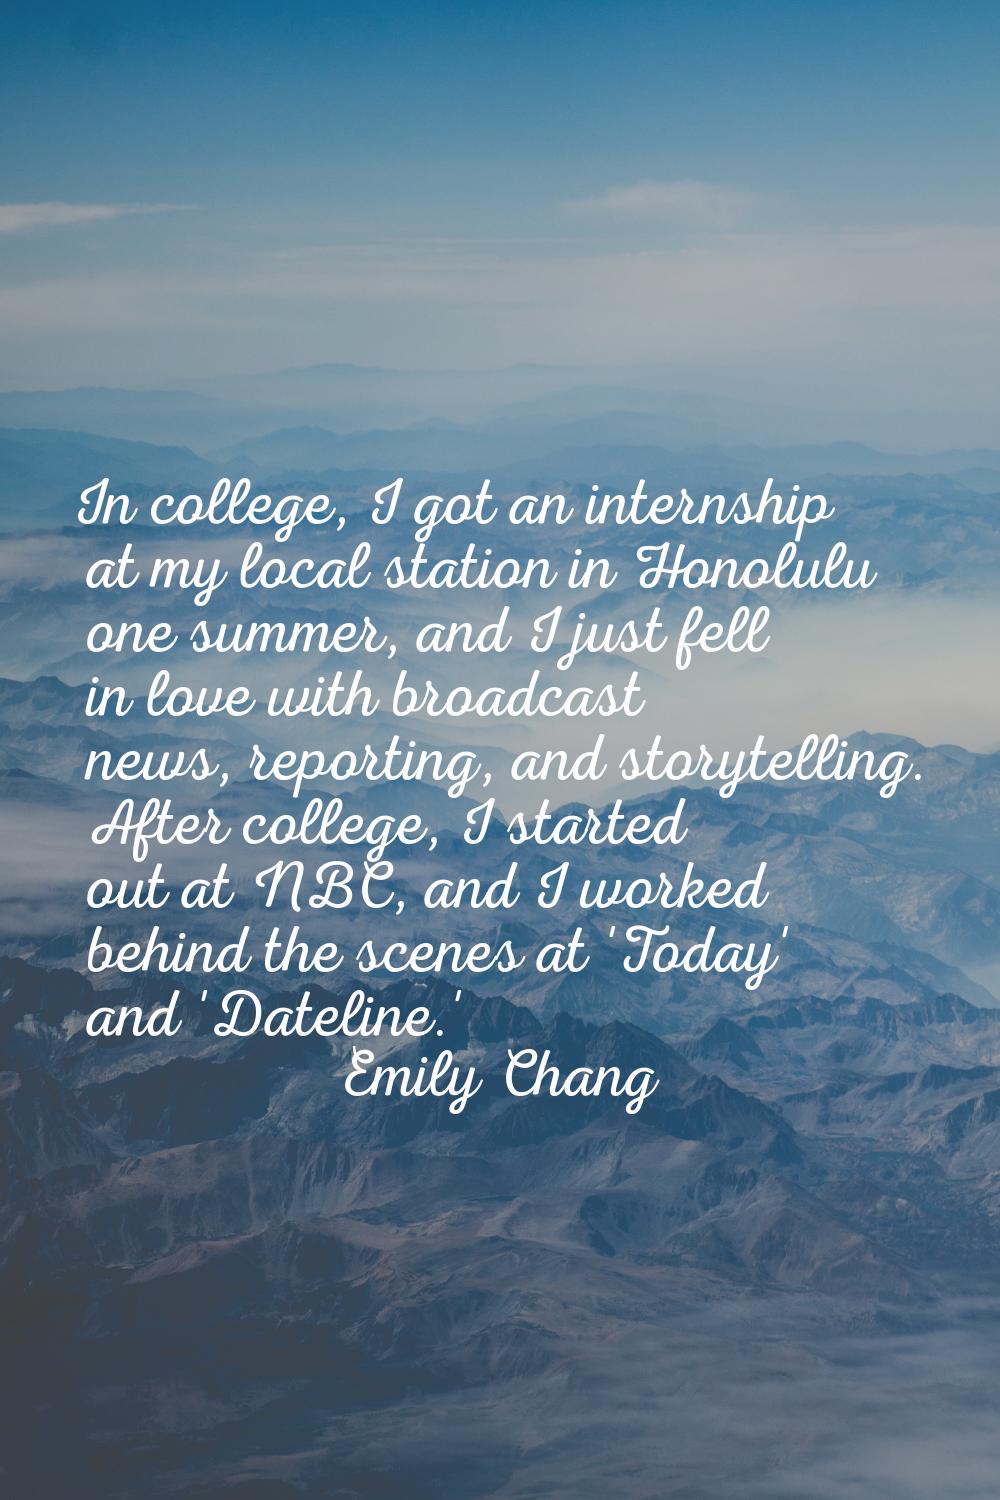 In college, I got an internship at my local station in Honolulu one summer, and I just fell in love